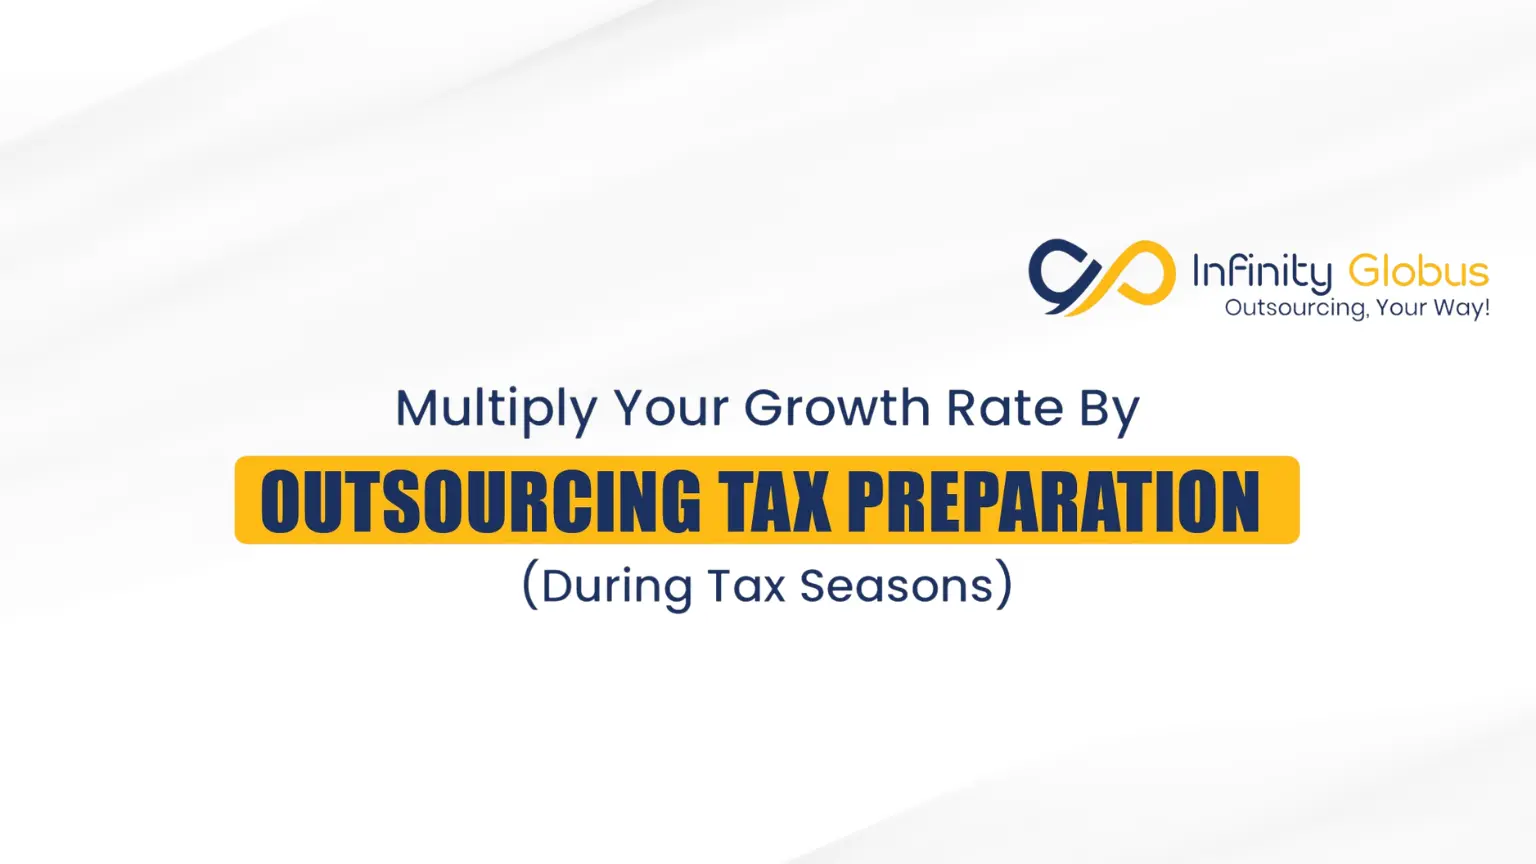 Multiply Your Growth Rate By Outsourcing Tax Preparation (During Tax Seasons)